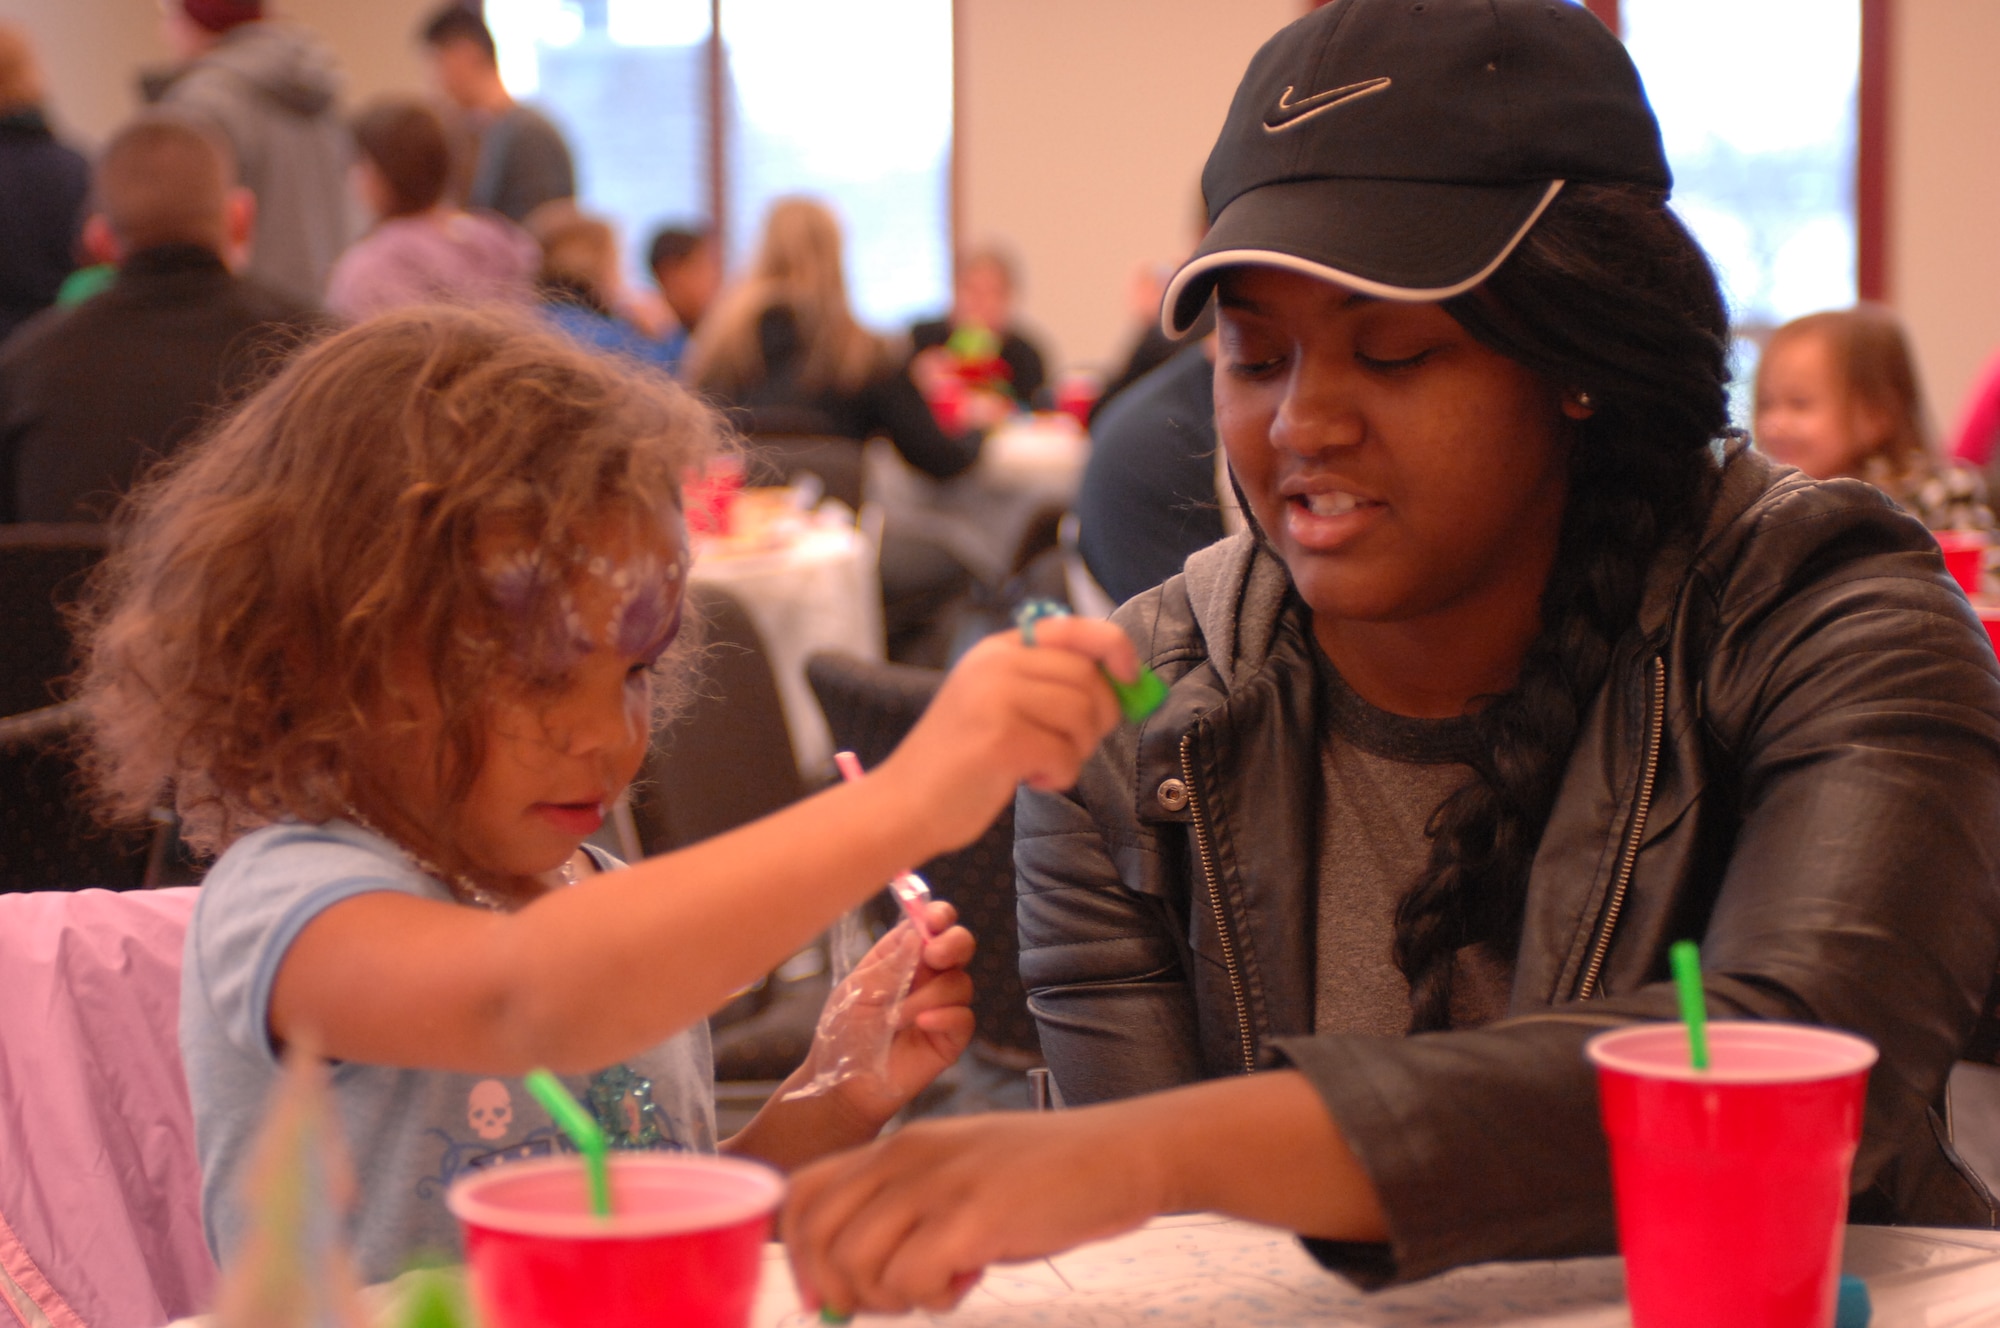 A child attending a holiday party sponsored by the Reconnaissance Crews Booster Club plays a game of tic, tac, toe with her volunteer chaperon at the Pointe at Rising View, Offutt Air Force Base, Neb., Dec. 12, 2015. The event combined a holiday party with a shopping trip in which underprivileged children received money to spend on winter clothing and shoes. (U.S. Air Force photo/Senior Airman Rachel Hammes)